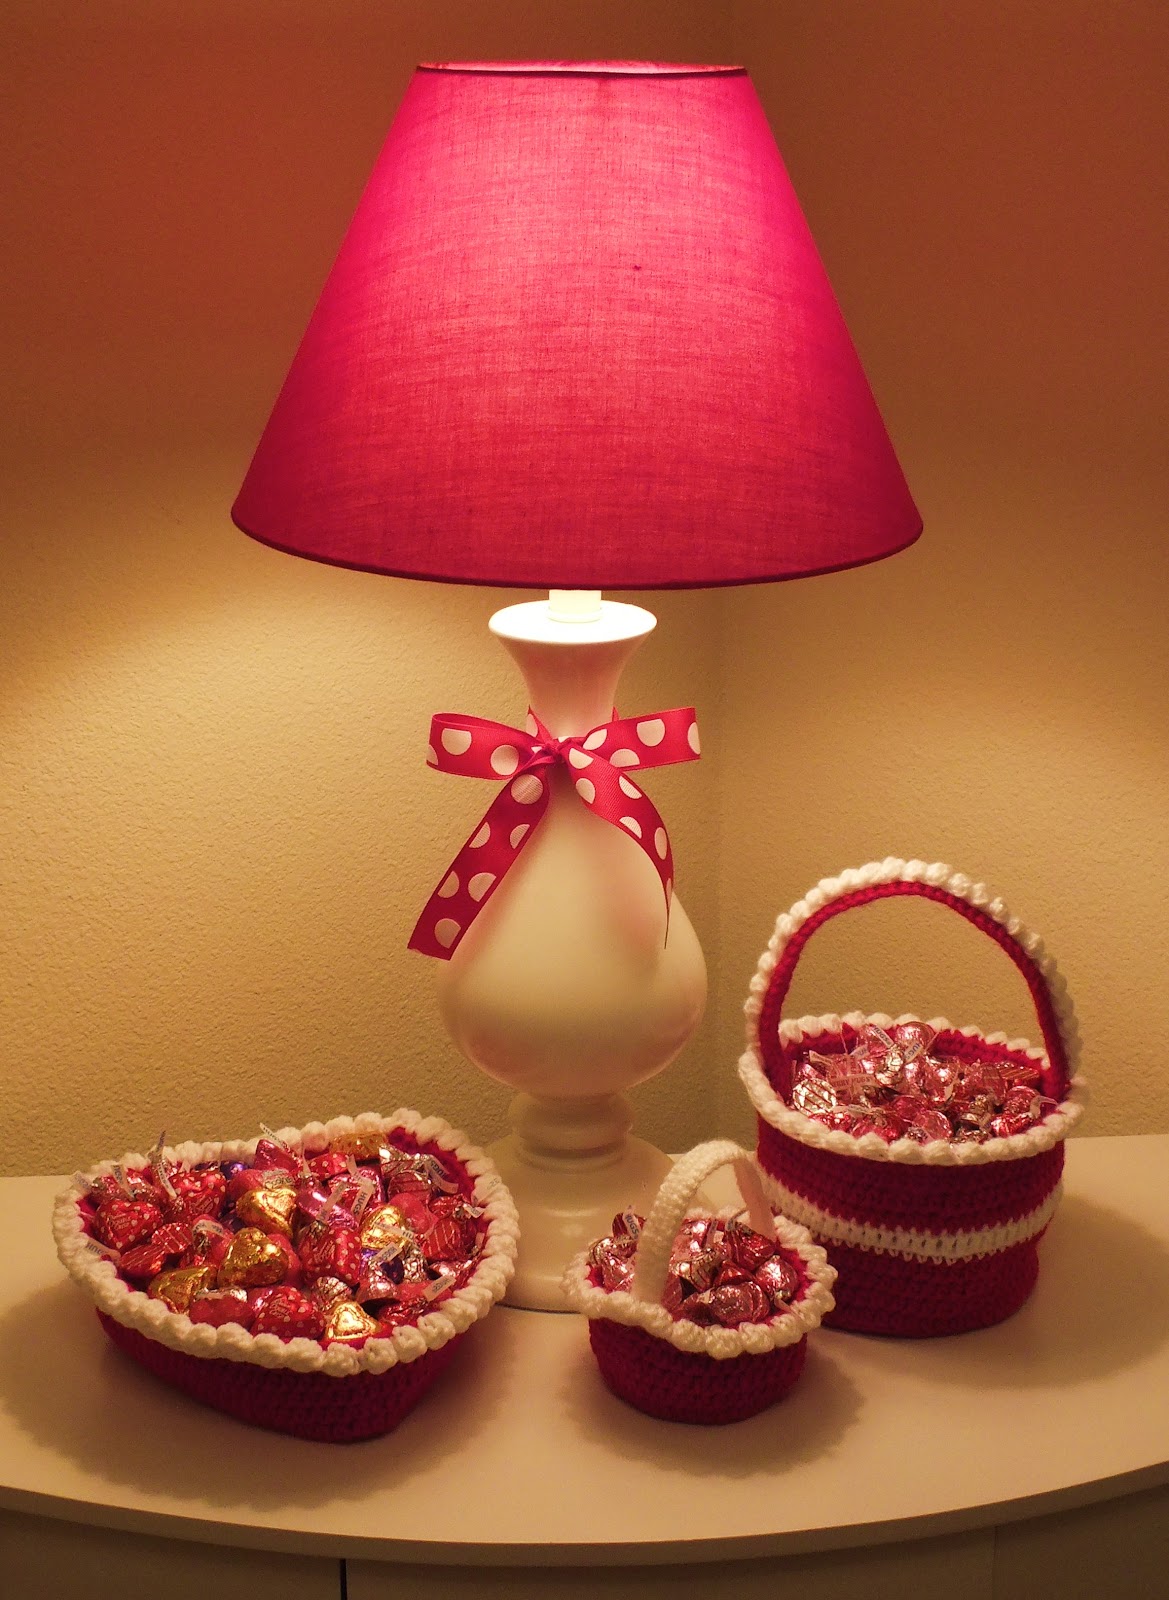 Connie's Spot© Crocheting, Crafting, Creating! Valentine's Day Baskets©